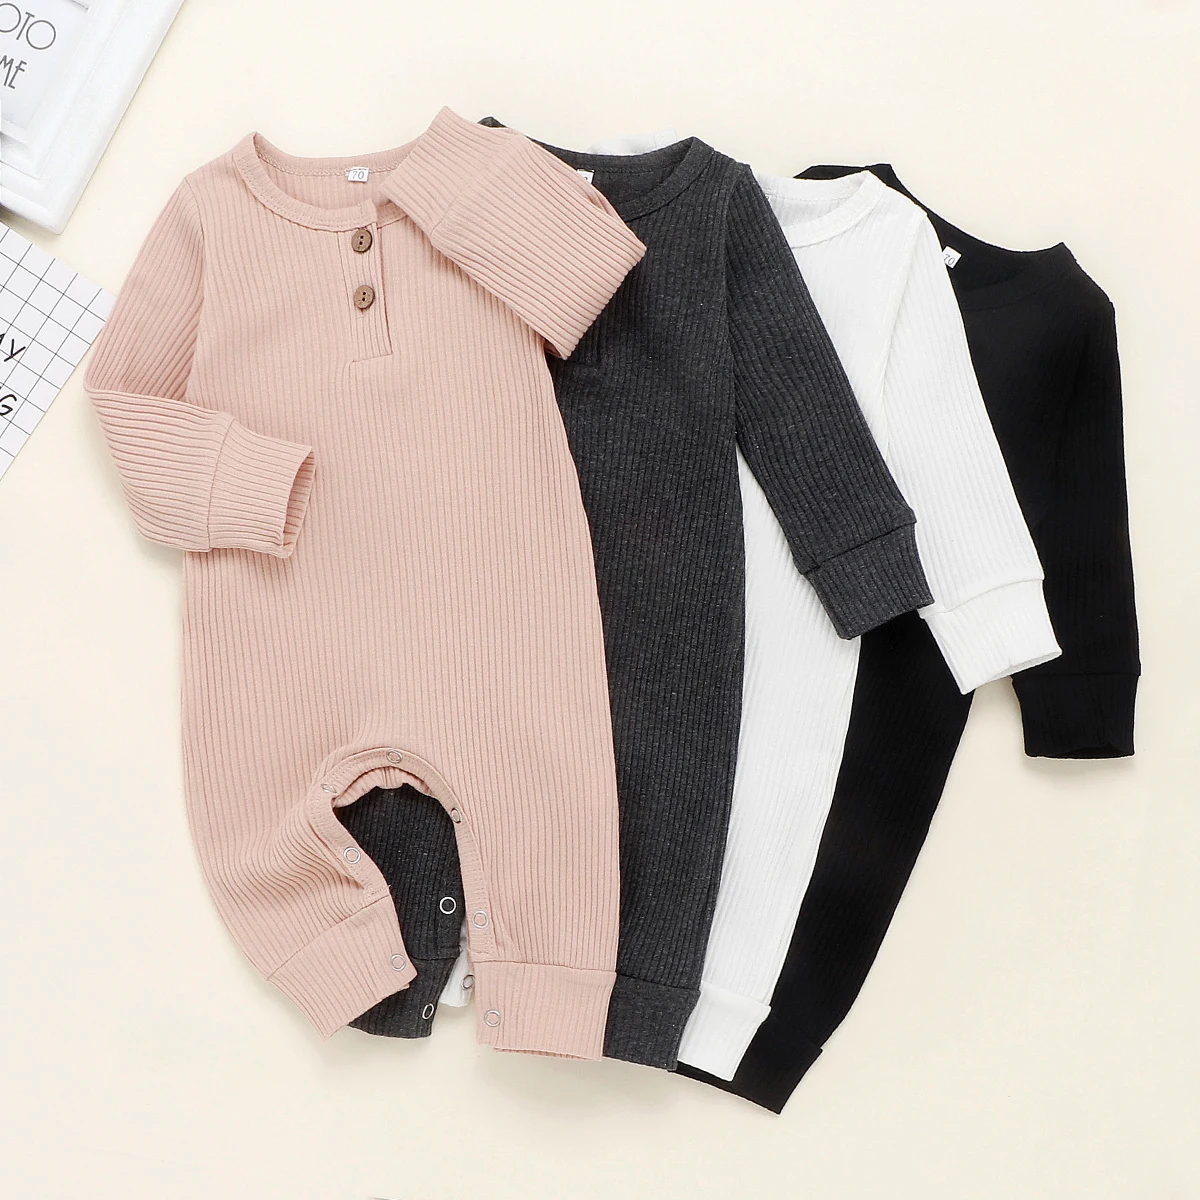 

Newborn Infant Toddler Baby Boy Girls Long Sleeve Romper Knitting Jumpsuit Clothes Outfits Warm Plain Winter Cute Lovely 0-18M